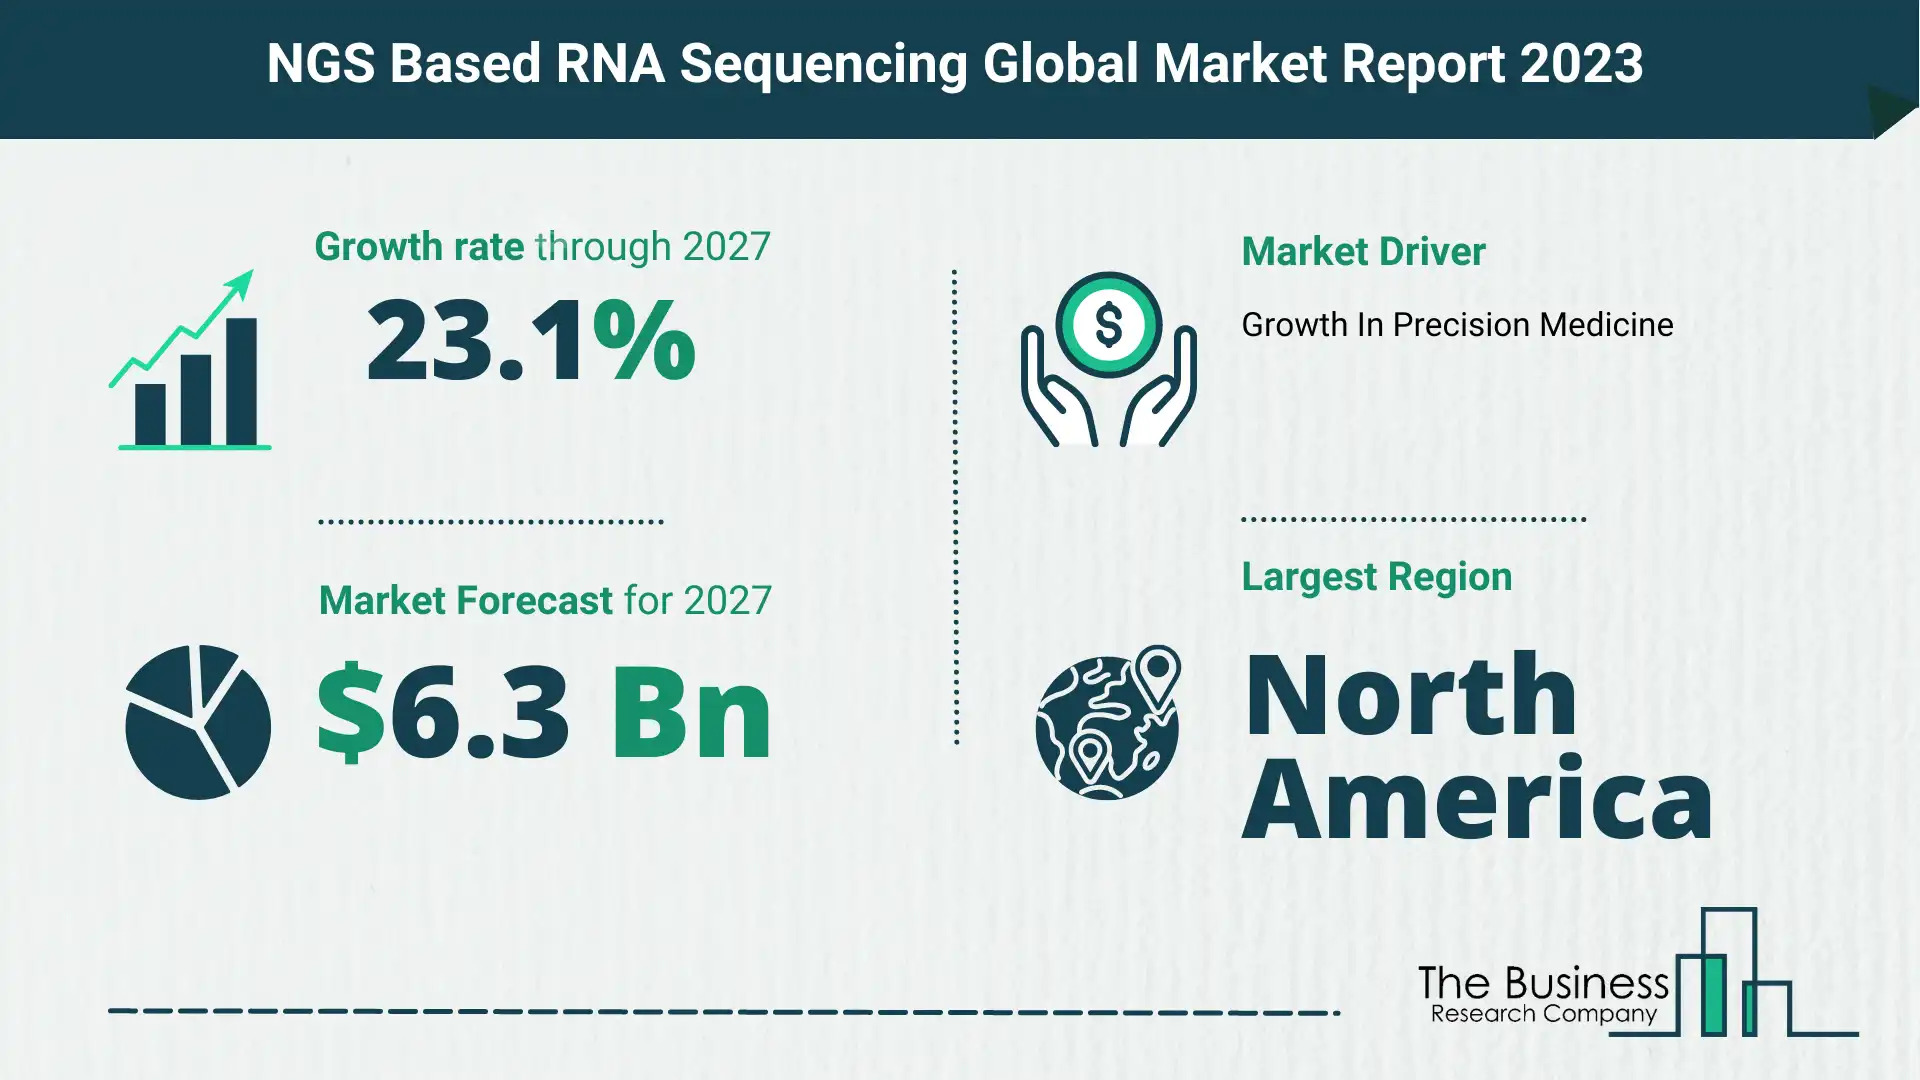 NGS based RNA sequencing market